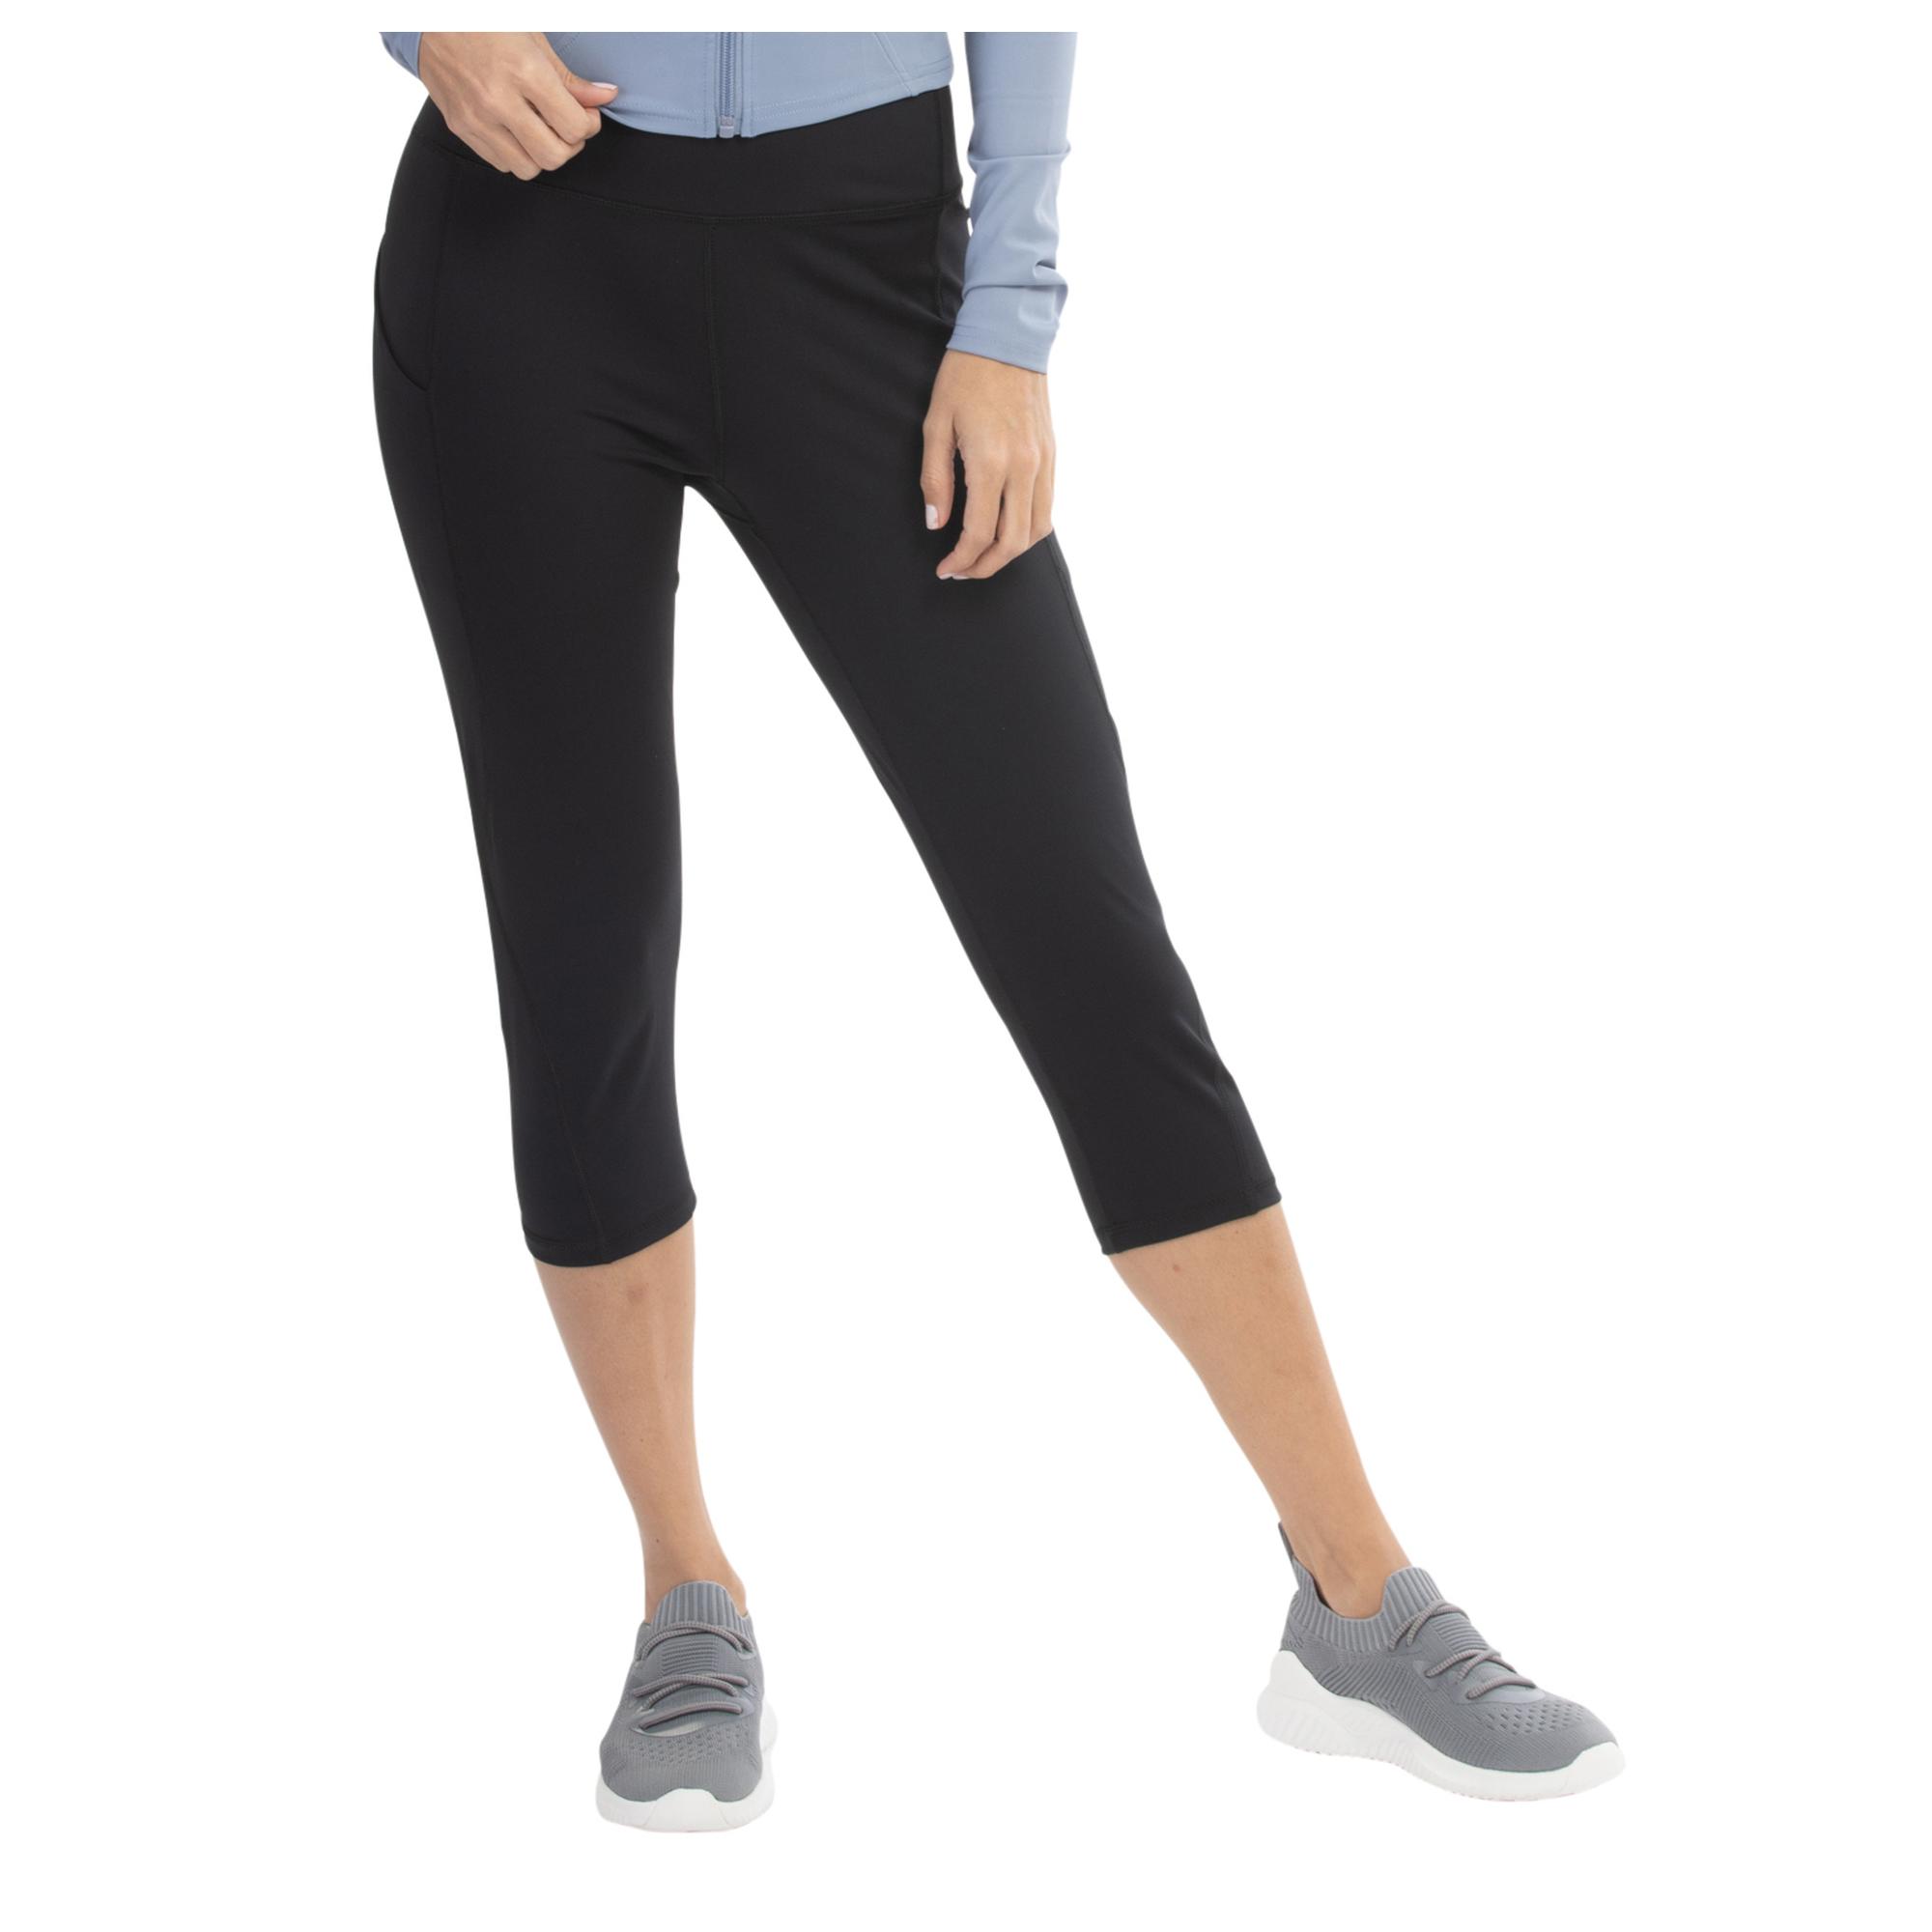 MID CALF LEGGINGS WITH BOWLS SIZE - Noritex